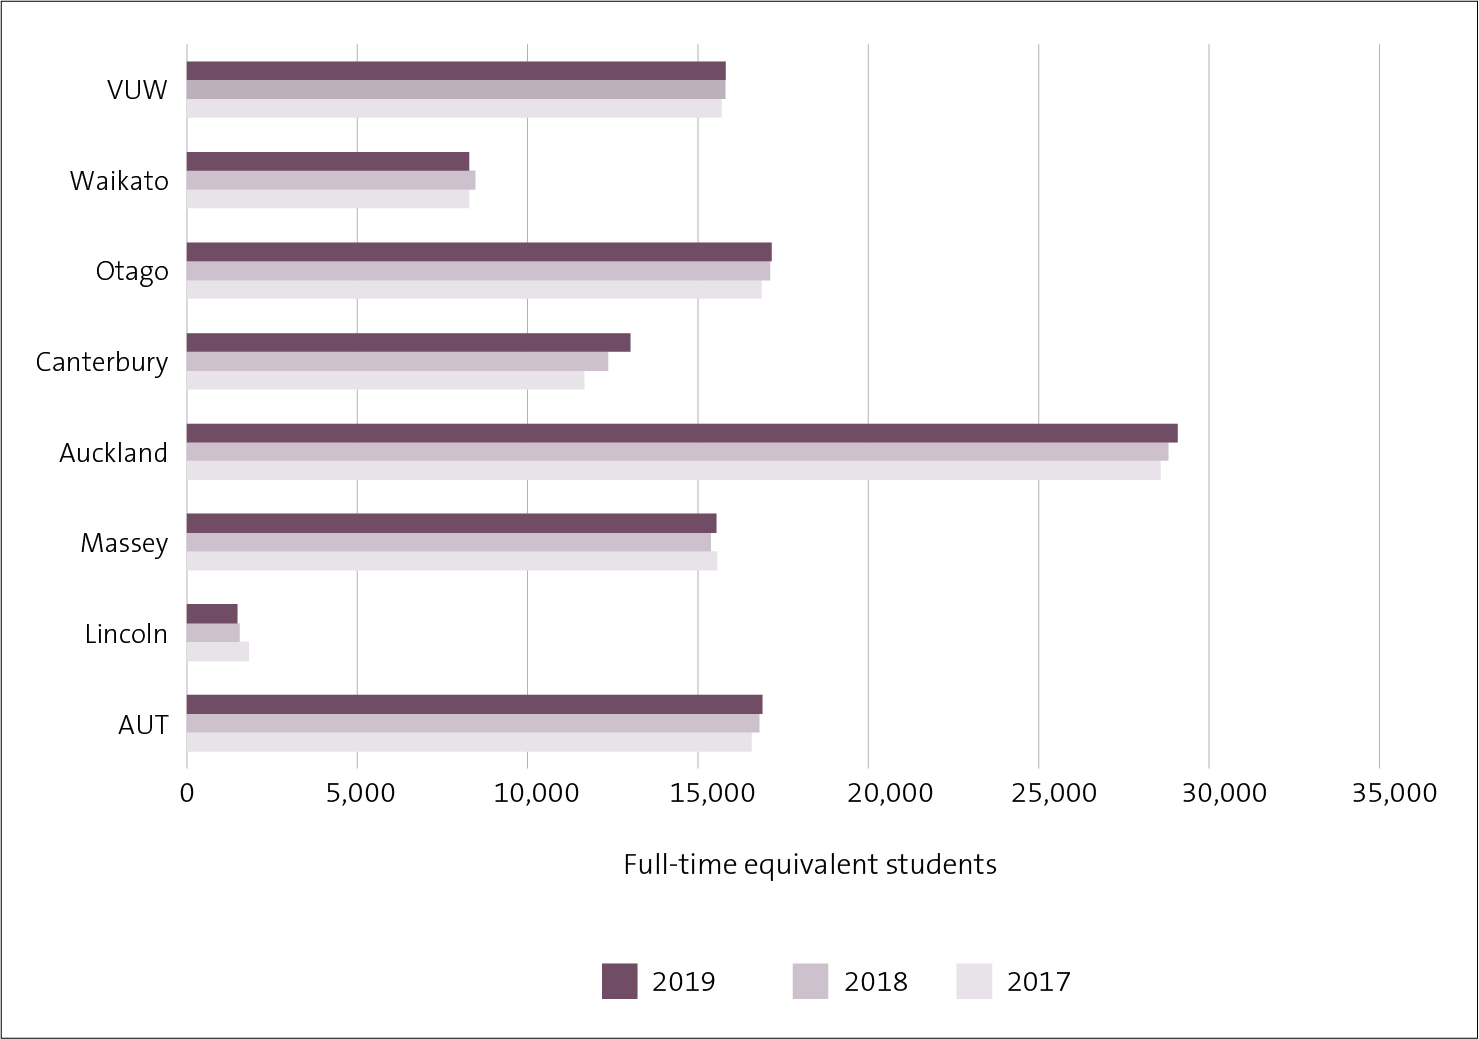 Figure 7 - Domestic equivalent full-time student enrolments at universities, from 2017 to 2019